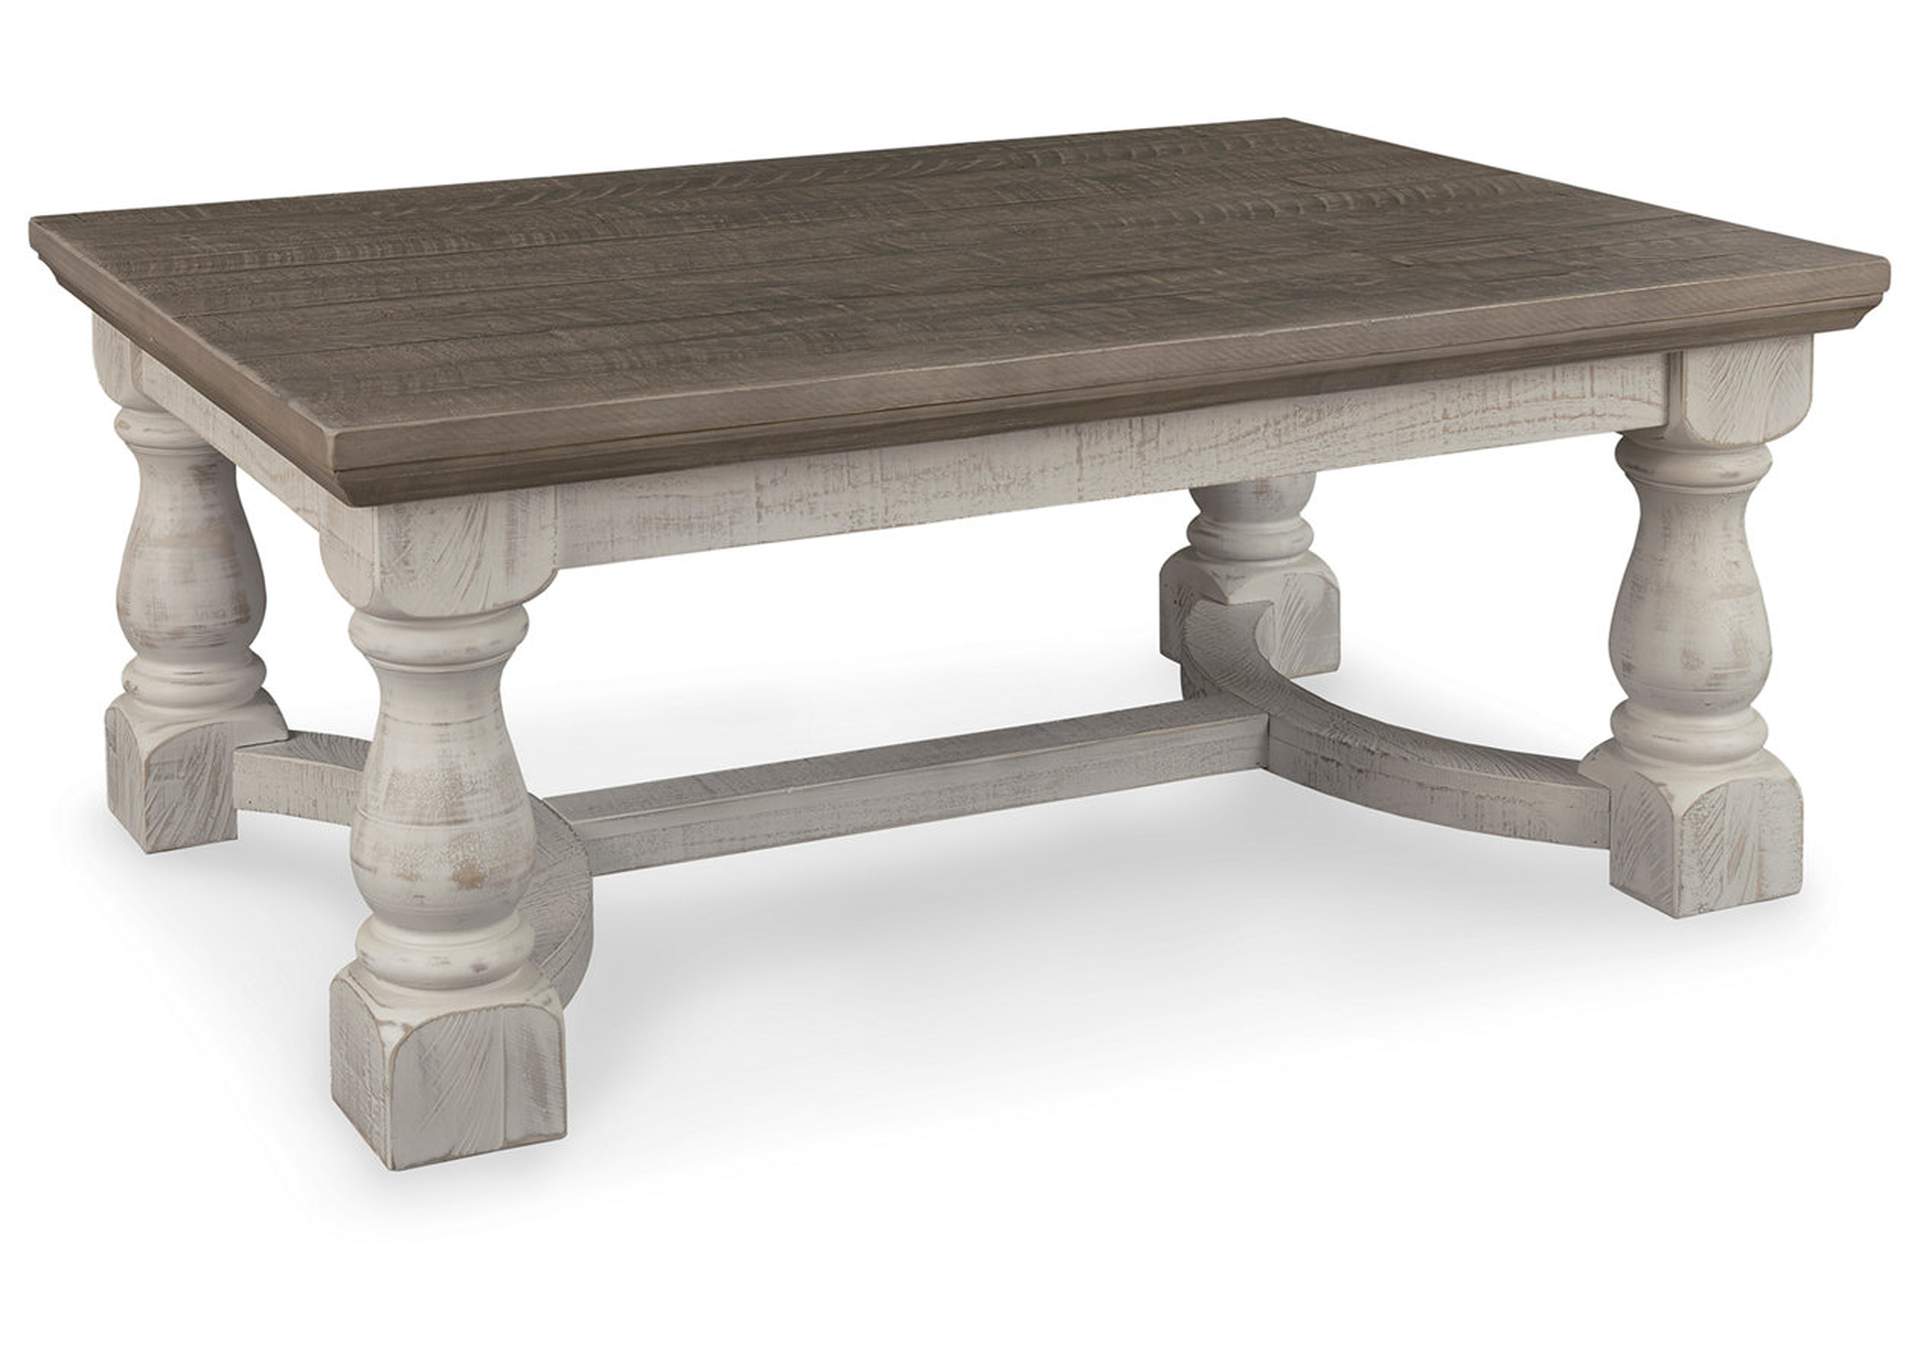 Havalance Coffee Table,Signature Design By Ashley